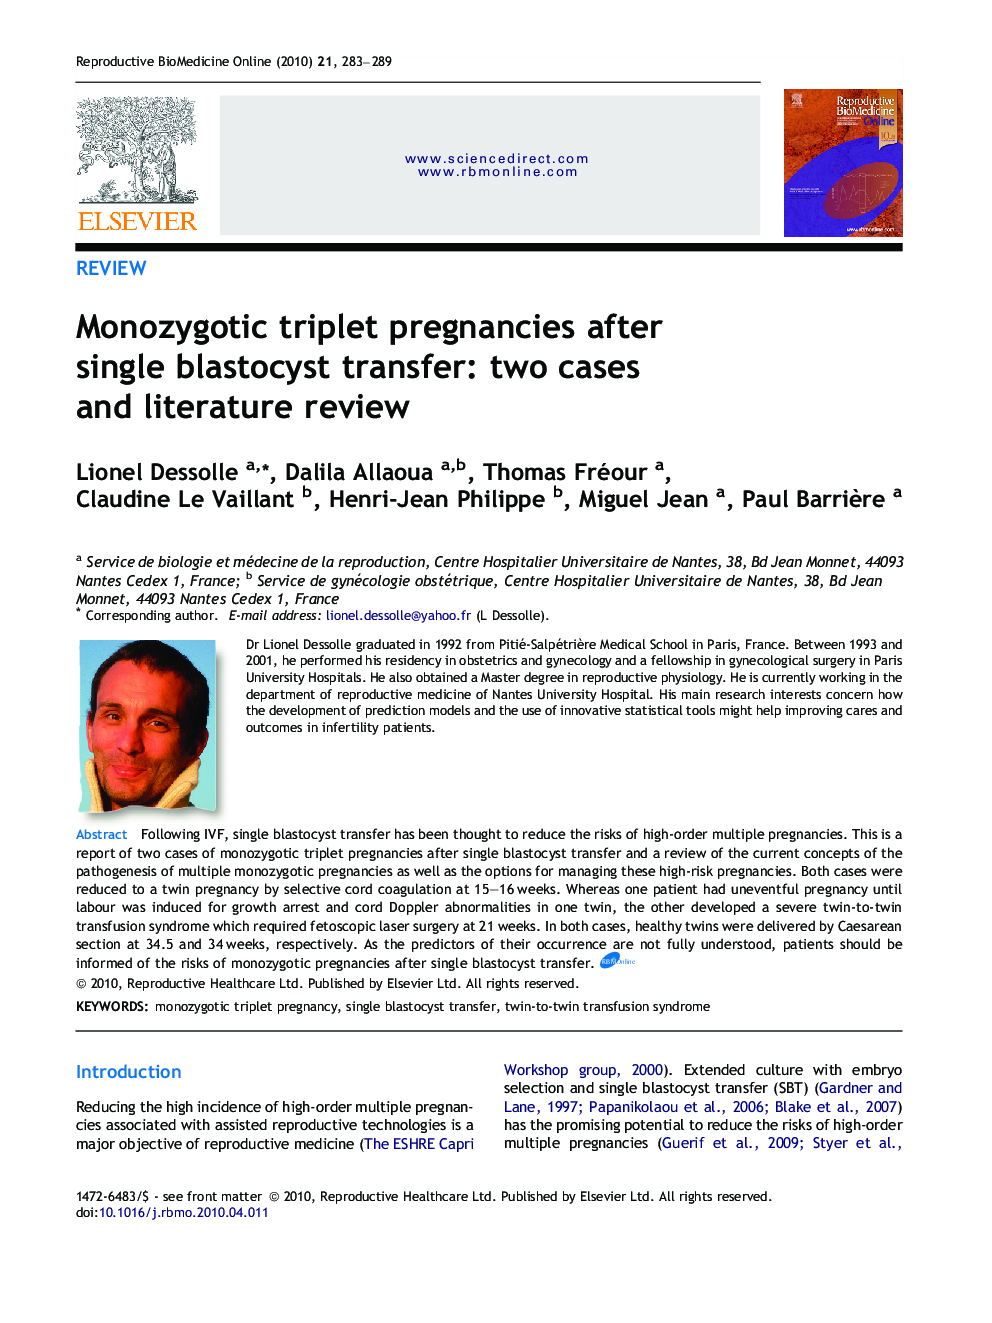 Monozygotic triplet pregnancies after single blastocyst transfer: two cases and literature review 